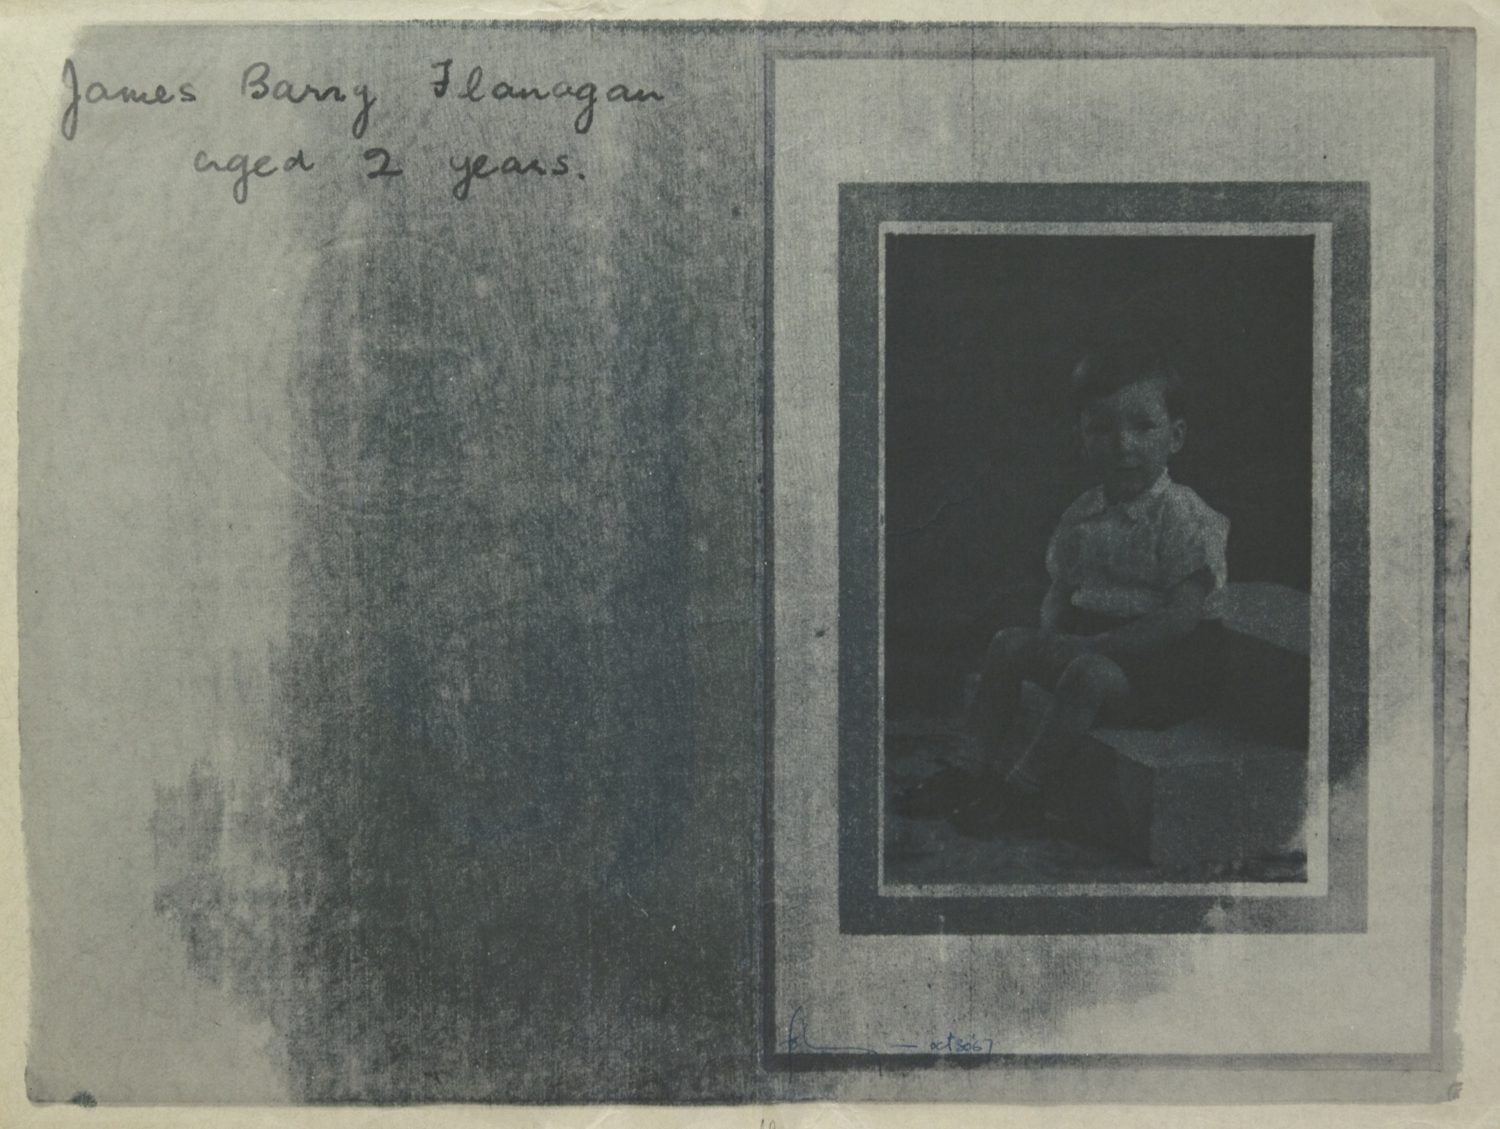 James Barry Flanagan aged 2 years